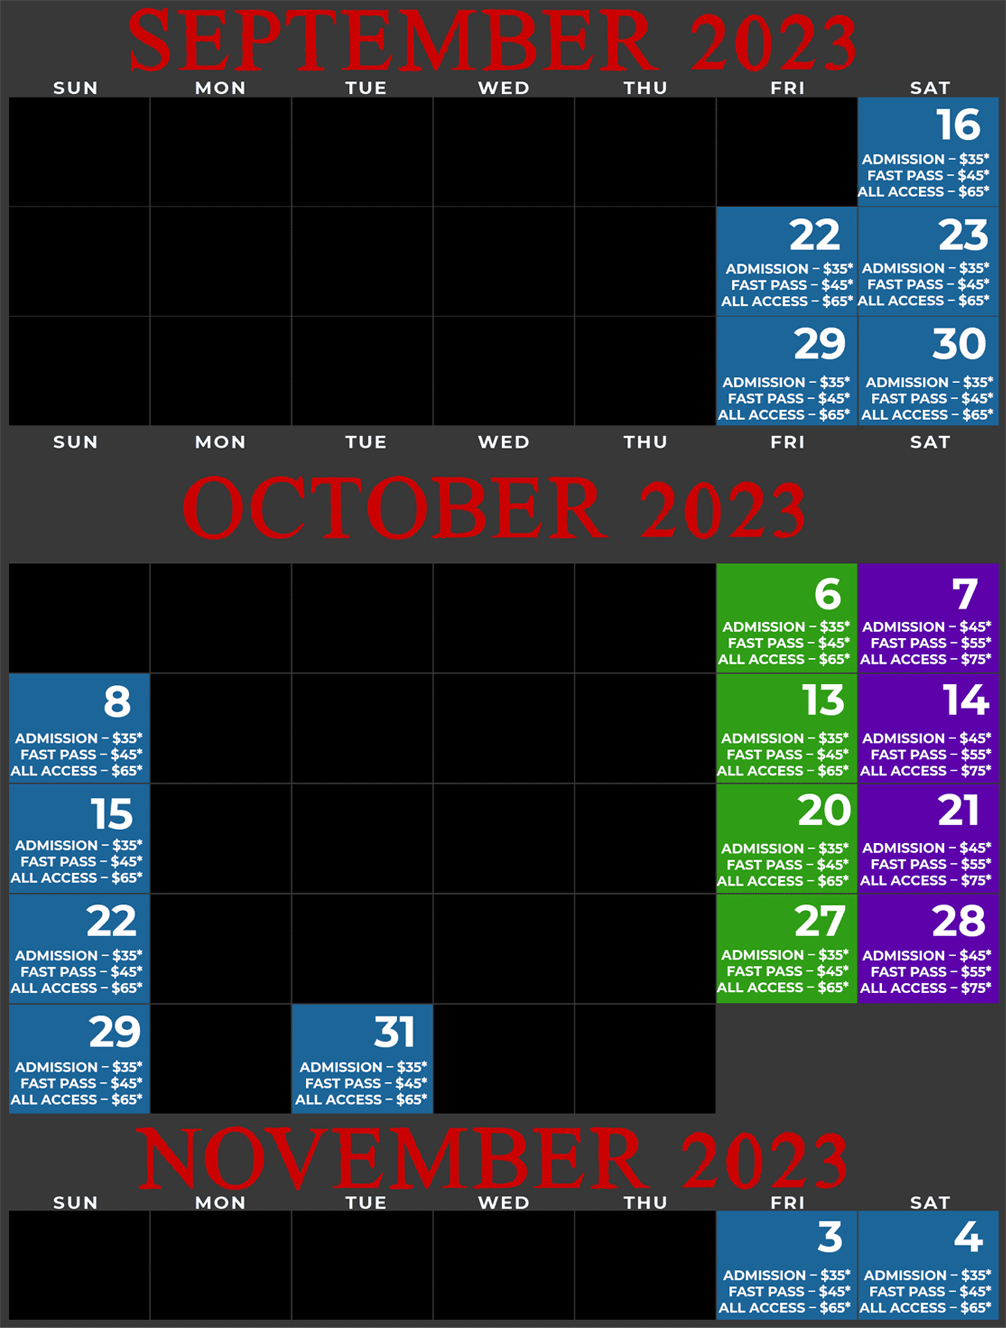 Woods of Terror Calendar - open dates and times for 2023